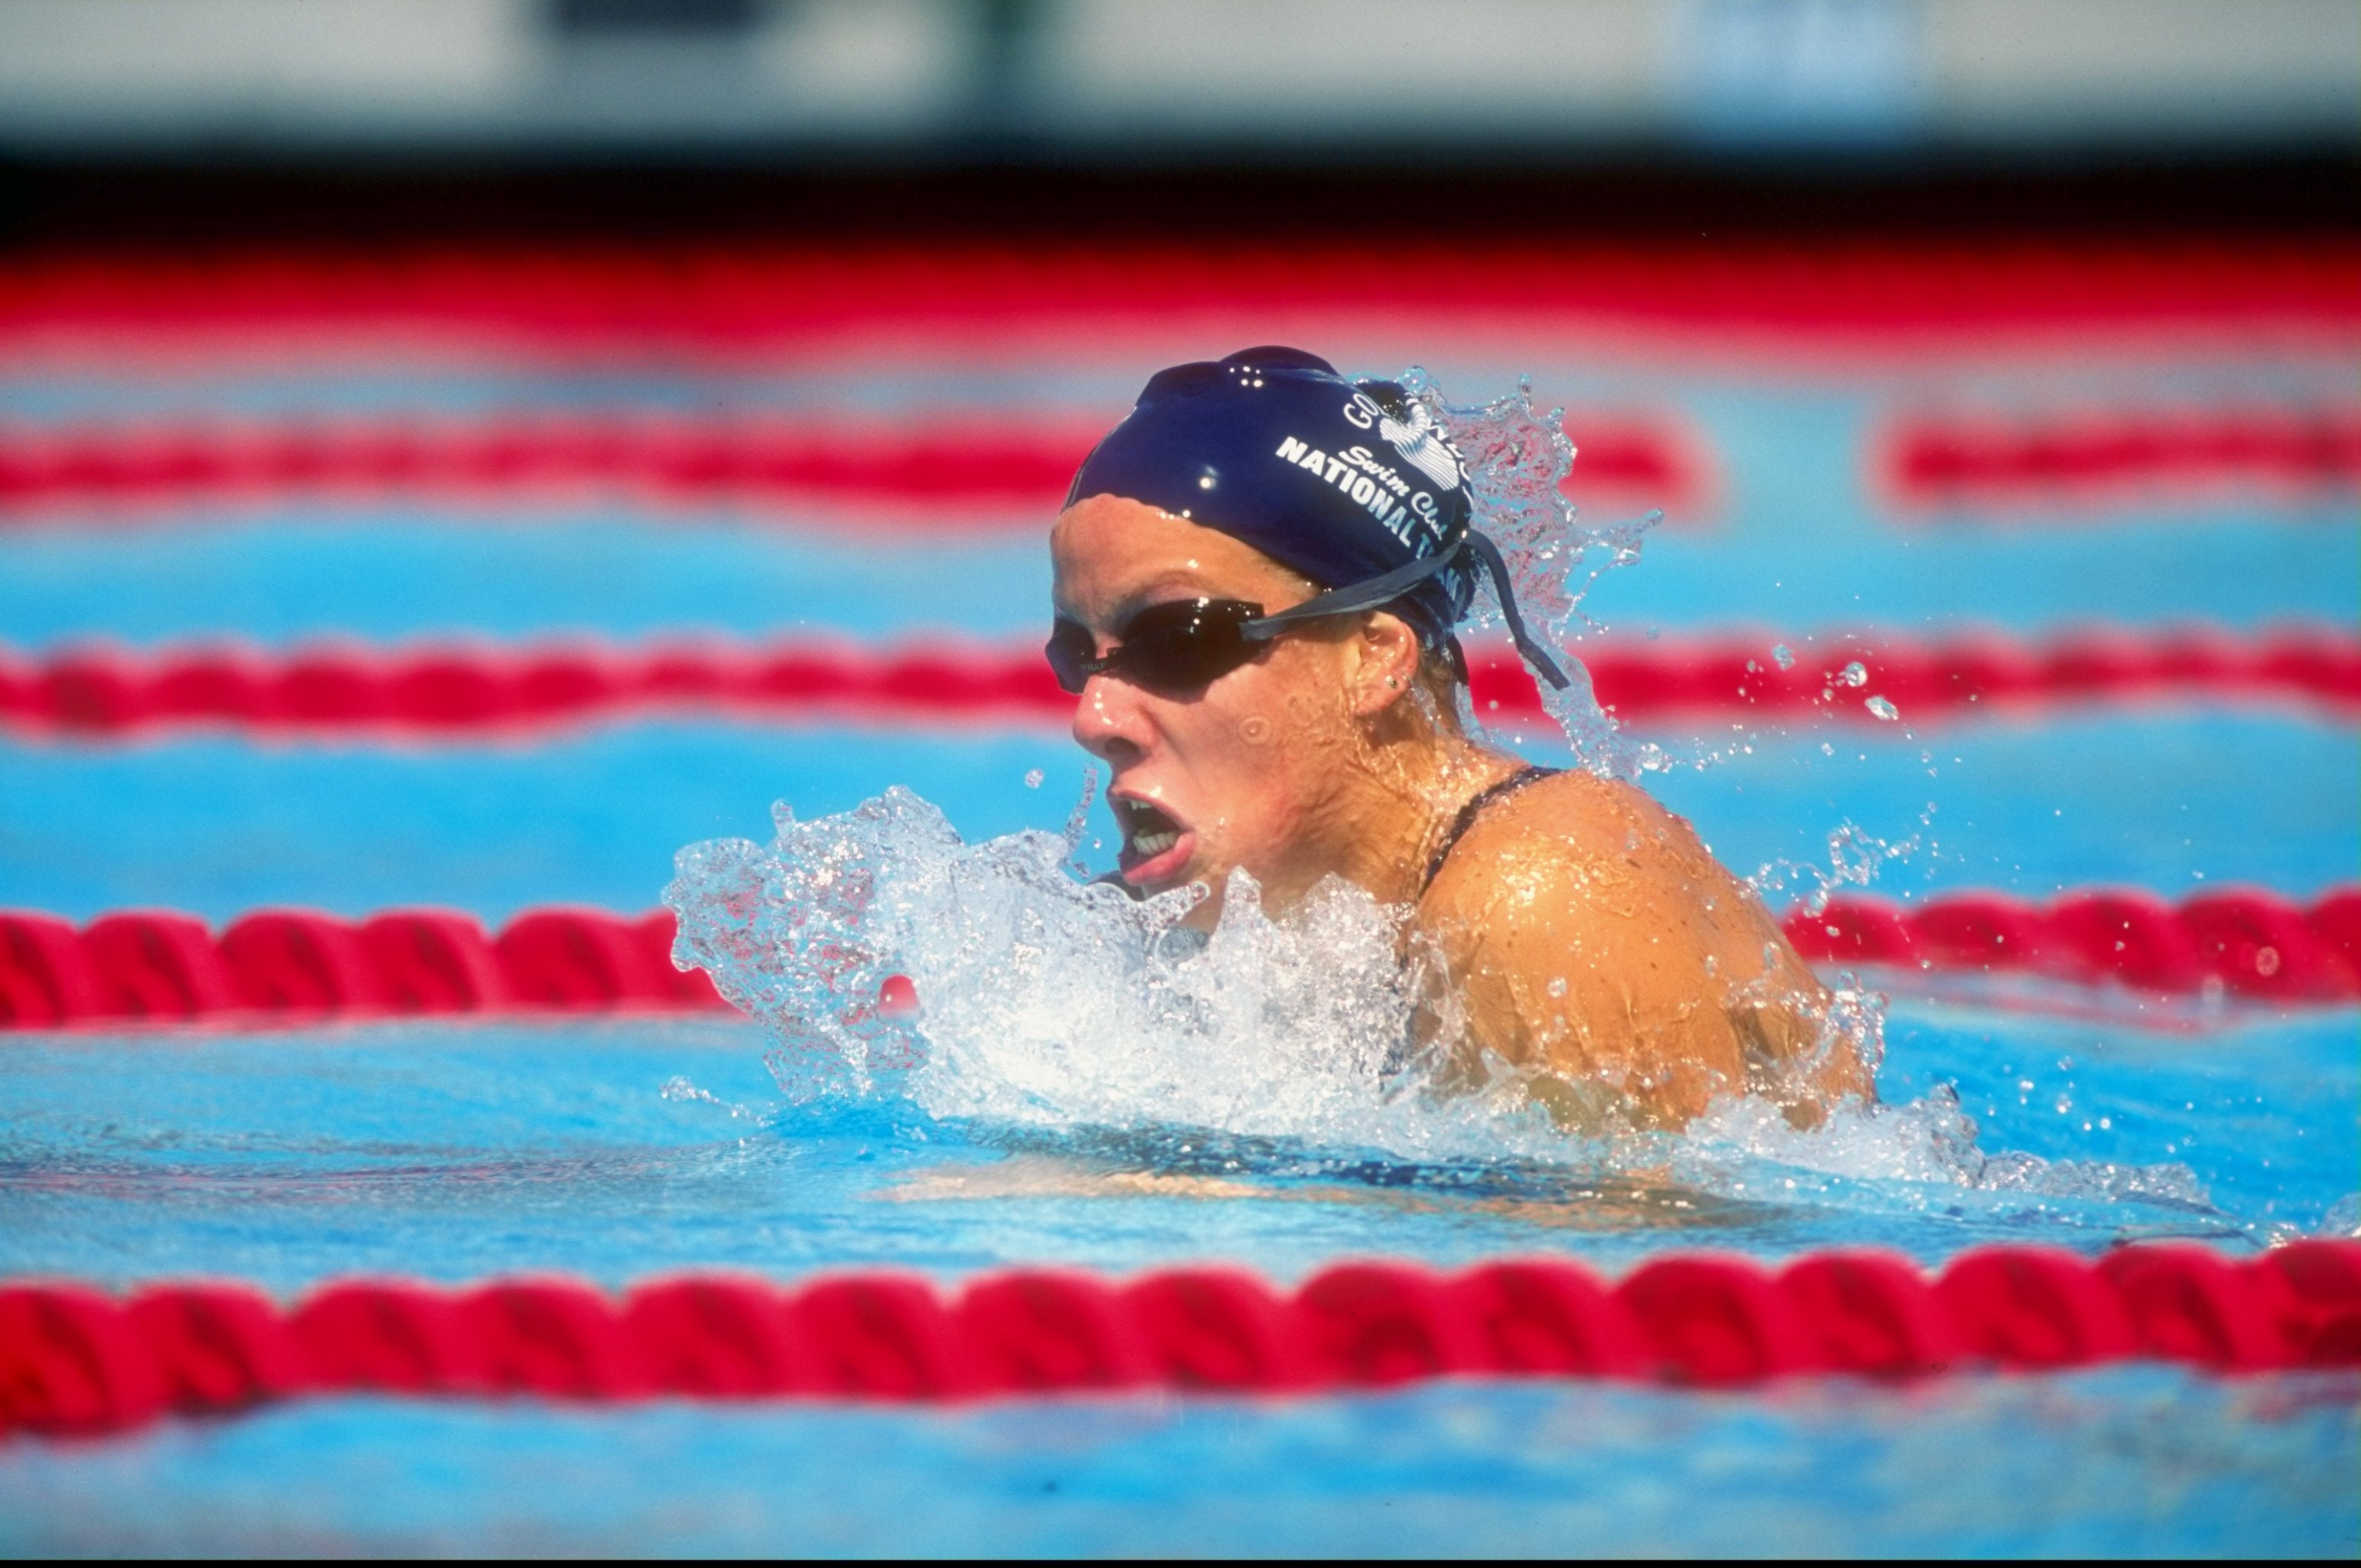 13 Aug 1998: Jamie Cail in action during the Phillips 66 National Championships at the Clovis Swim Complex in Clovis, California.